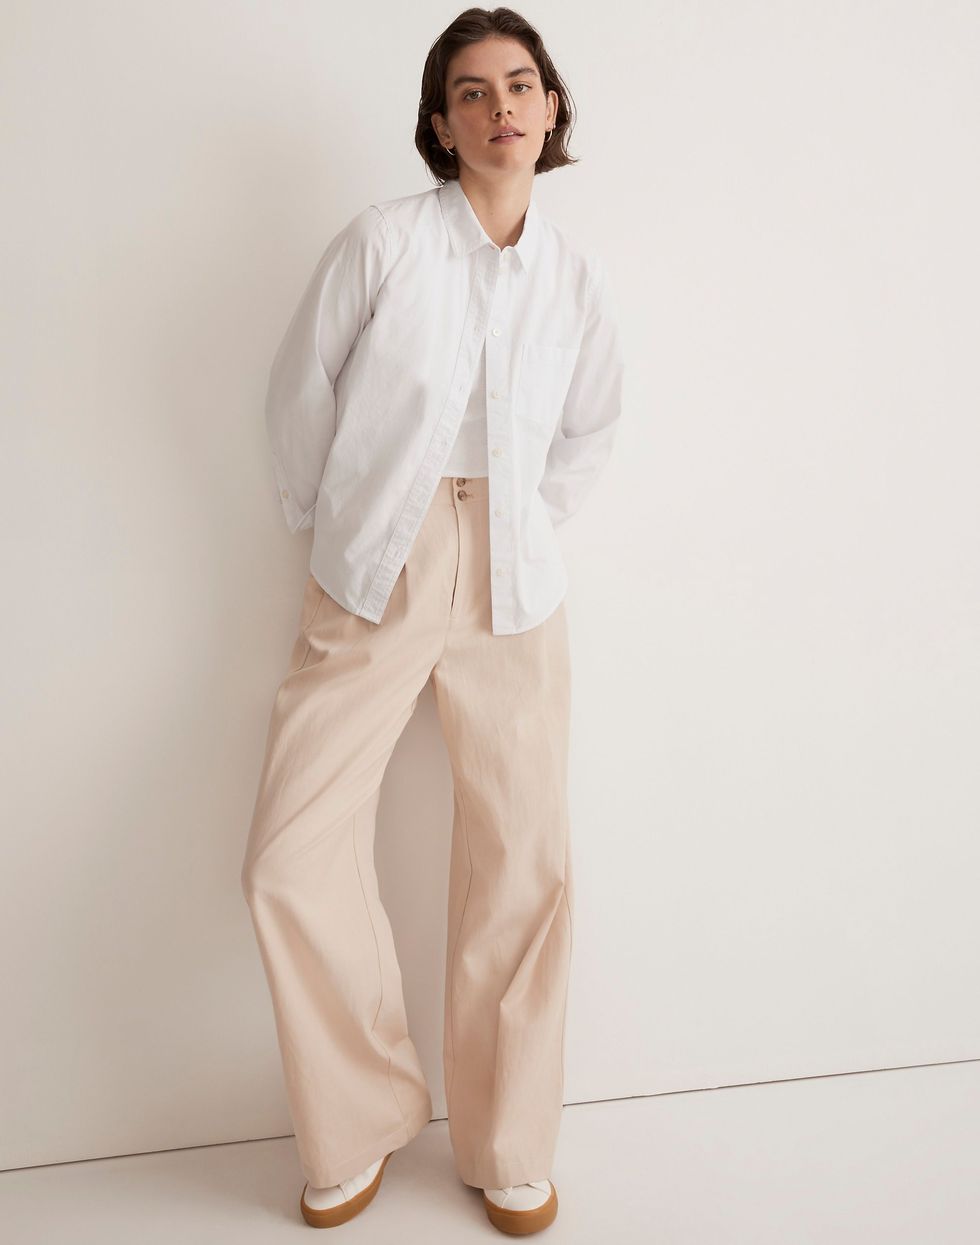 Madewell Harlow Wide-Leg Pants Review 2023